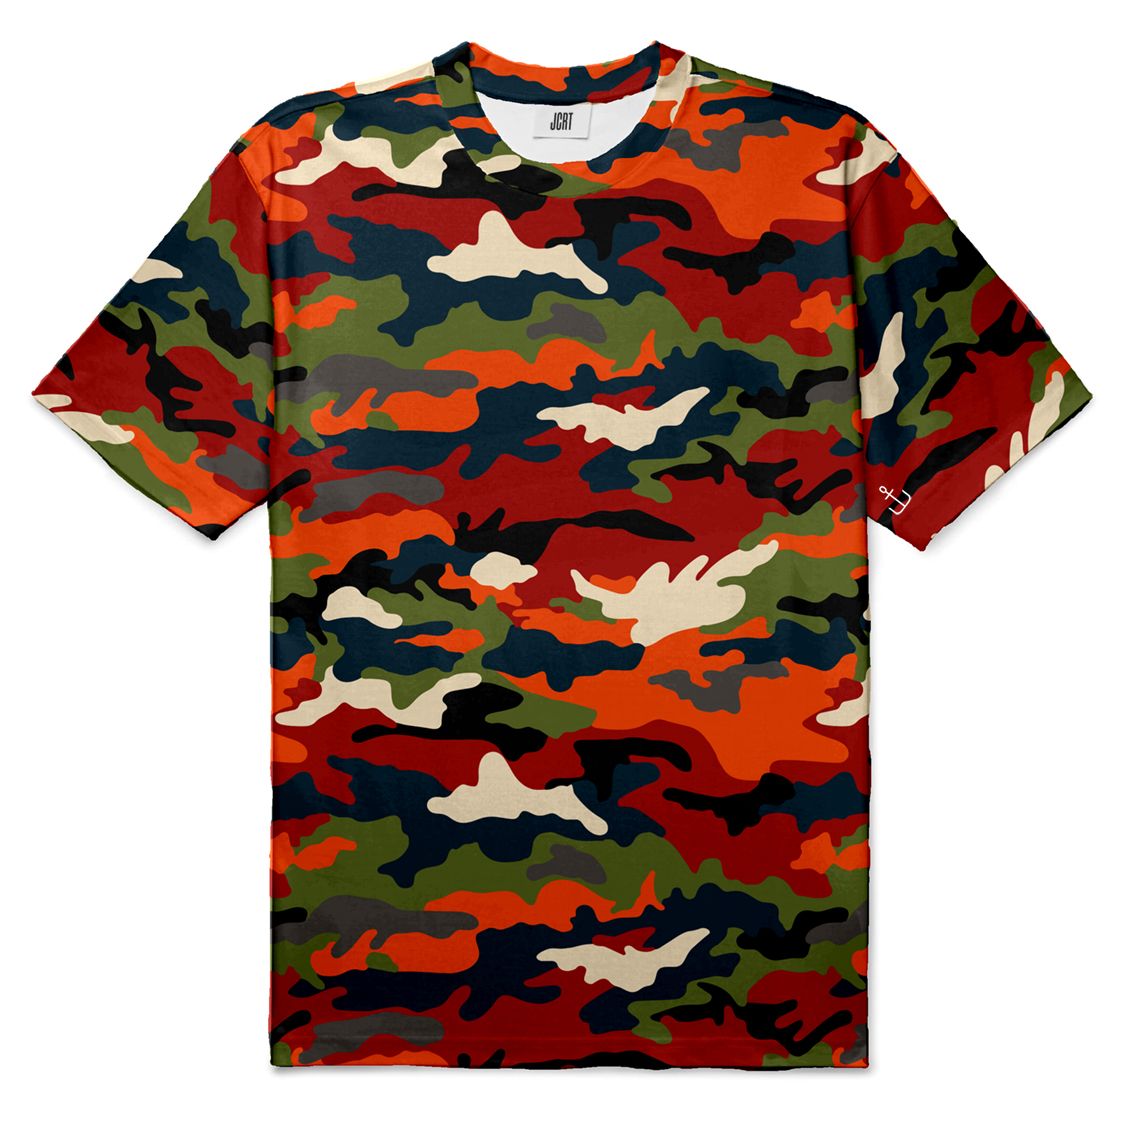 The Modern Nature Camouflage T-Shirt